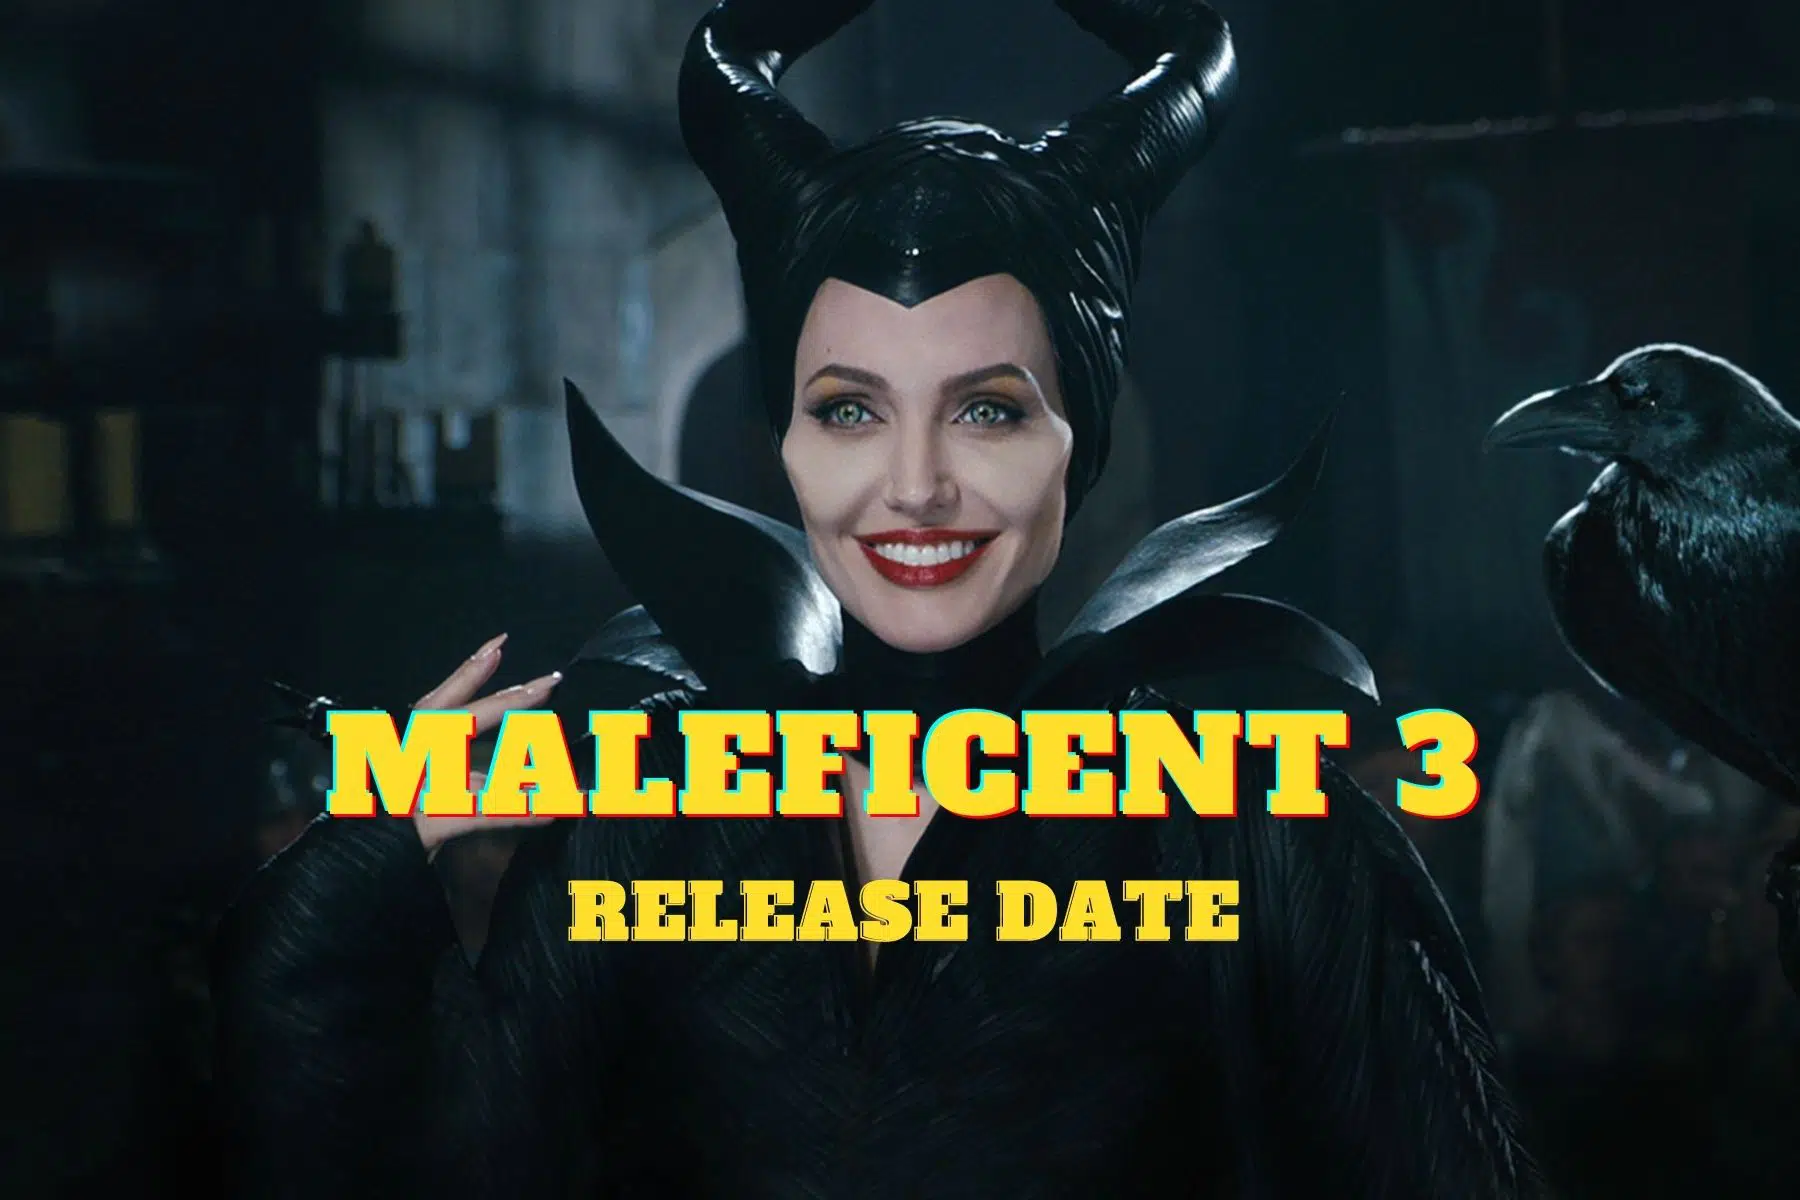 Maleficent 3 Release Date, Trailer - Is it Canceled?